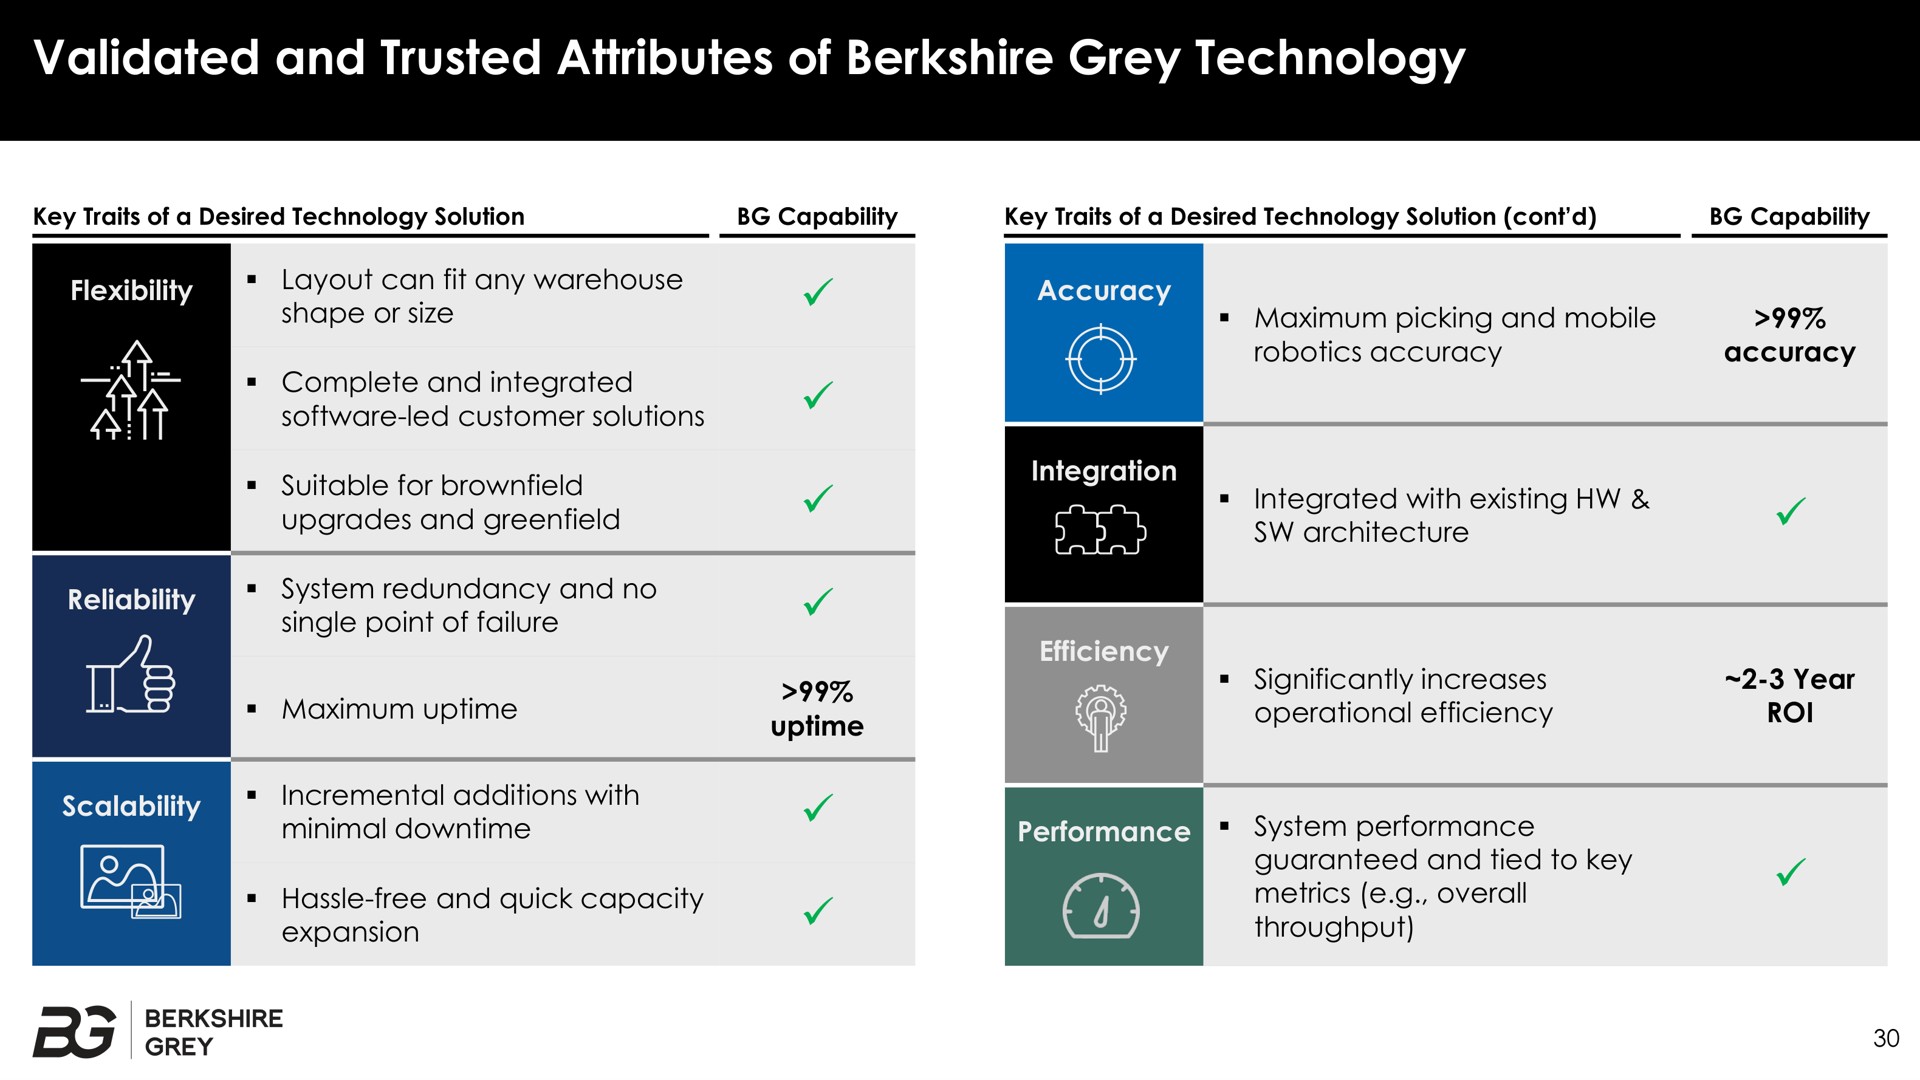 validated and trusted attributes of grey technology ria | Berkshire Grey